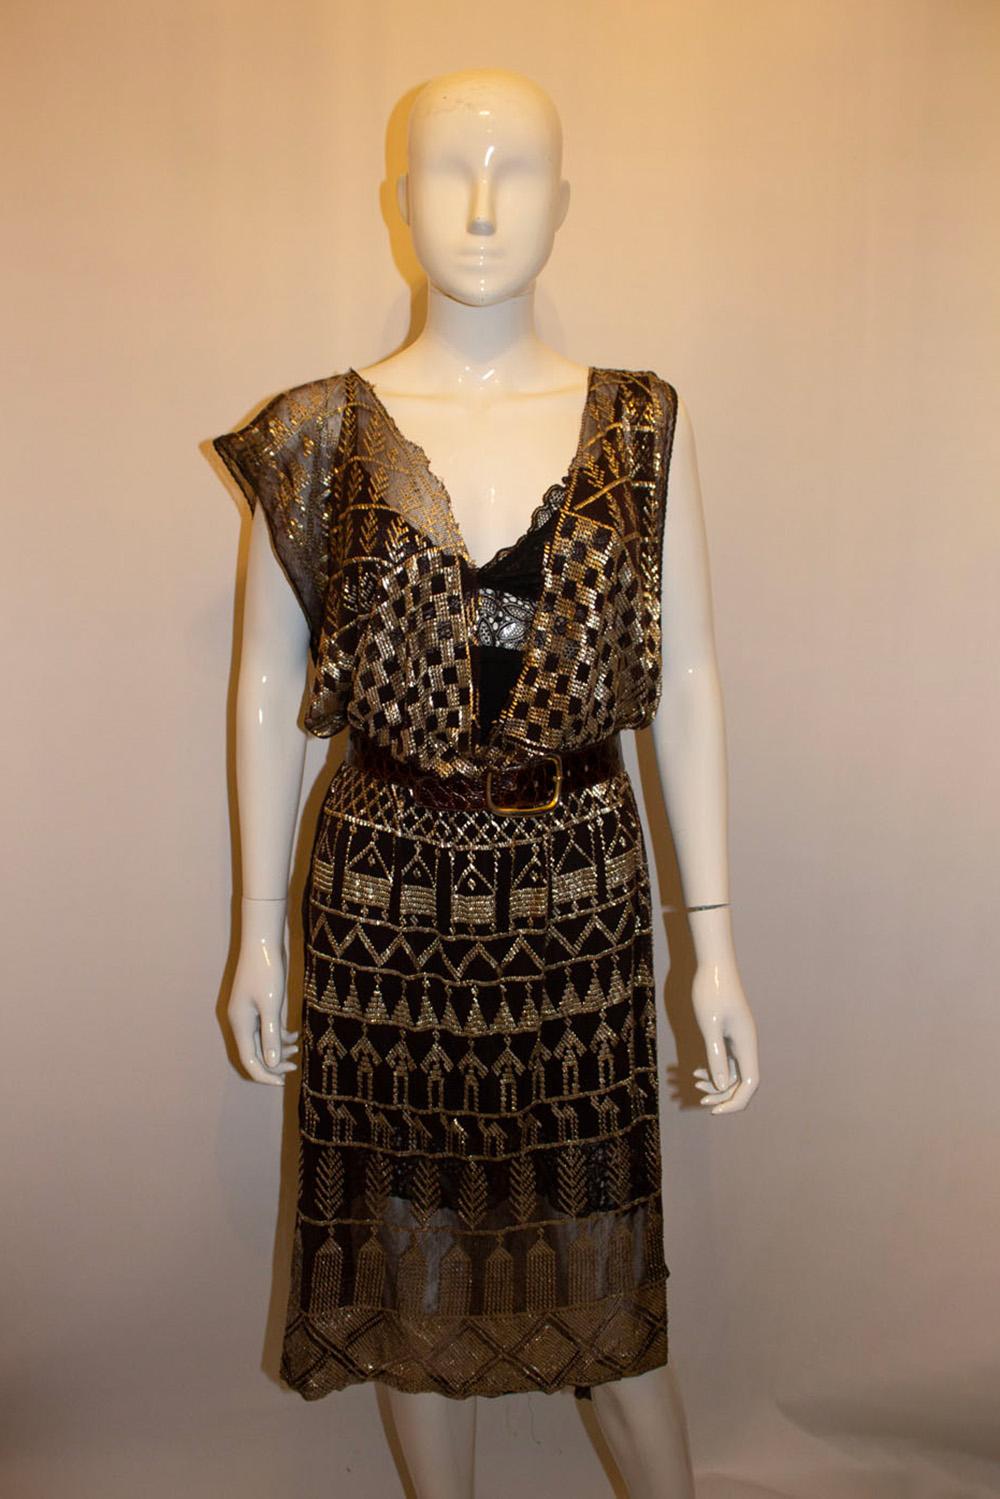 A headturning vintage evening dress . The dress is made of a brown and gold assuit fabric dating from the 1920s. It simply pops over the head and ties with a belt at the waist . In very good condition. 
Measurements: width 36'', length 82''